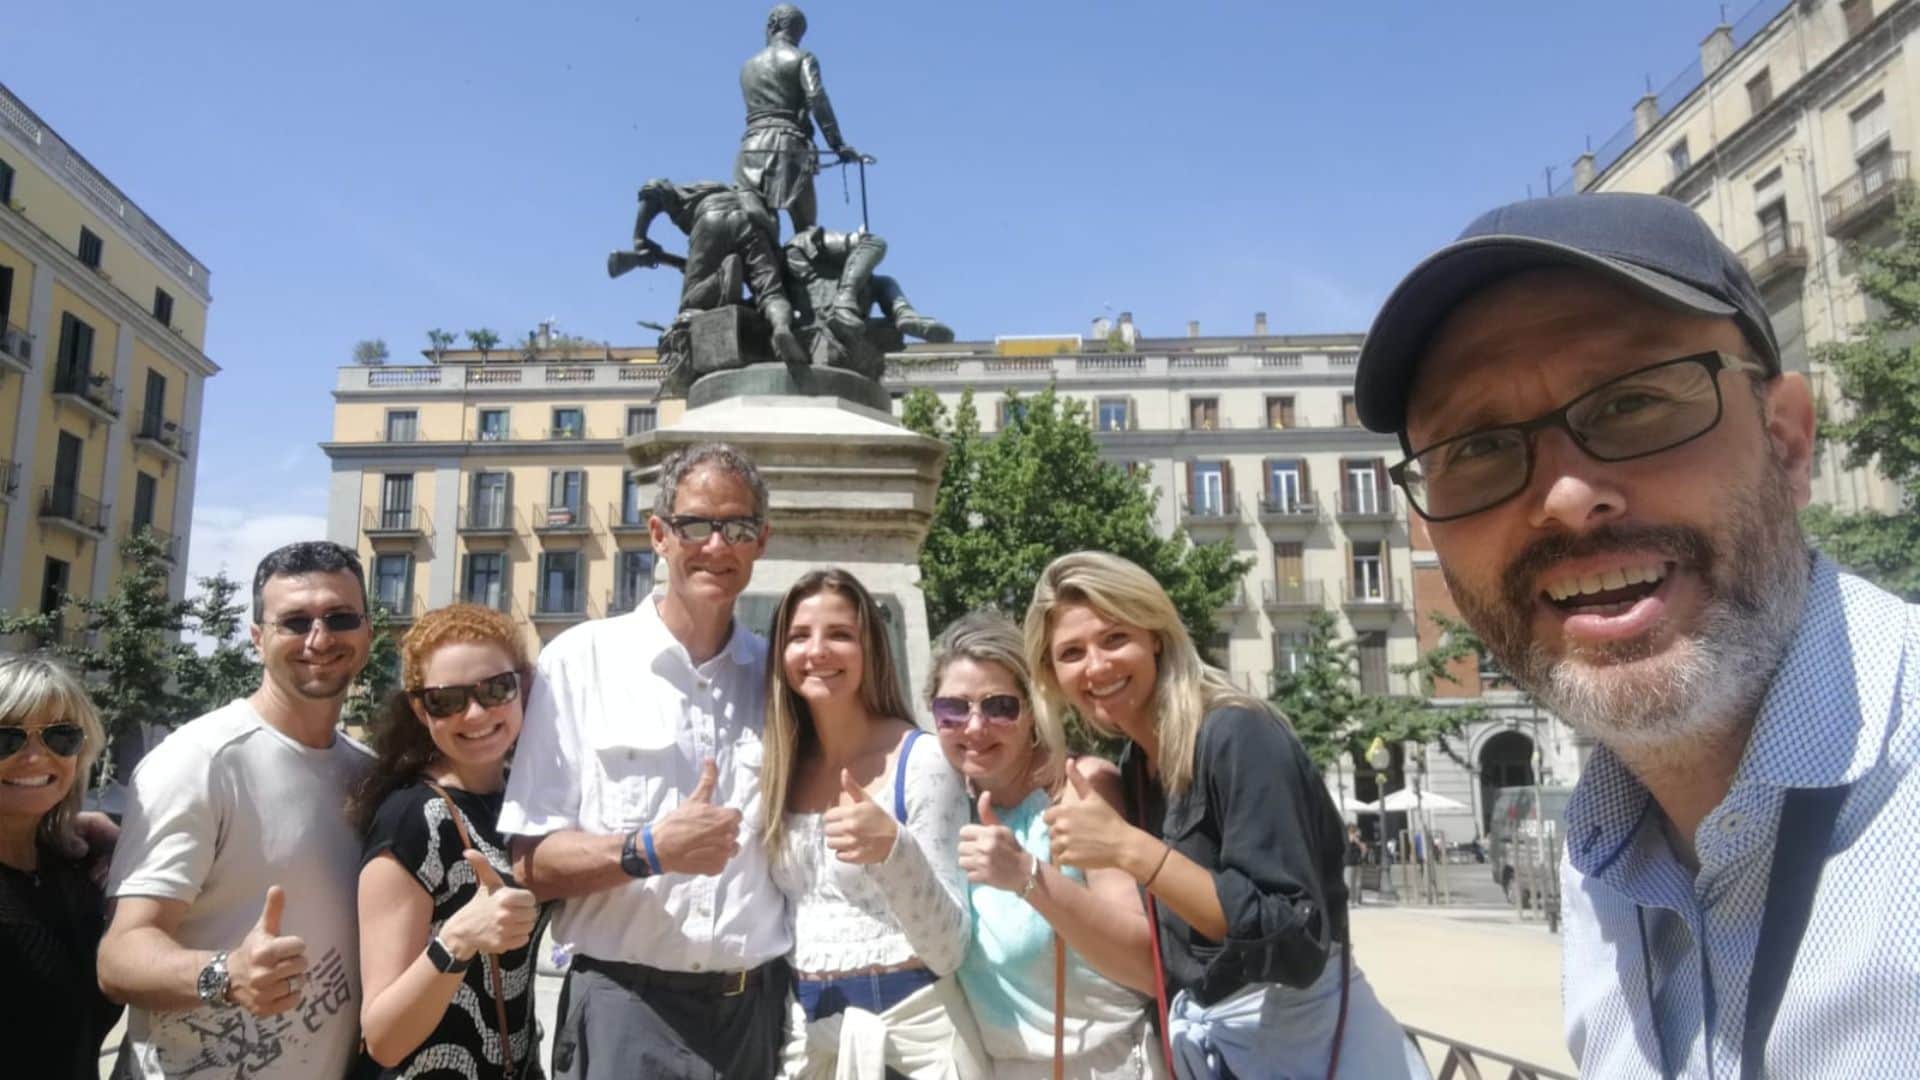 Small Group Tours - In out Barcelona Tours